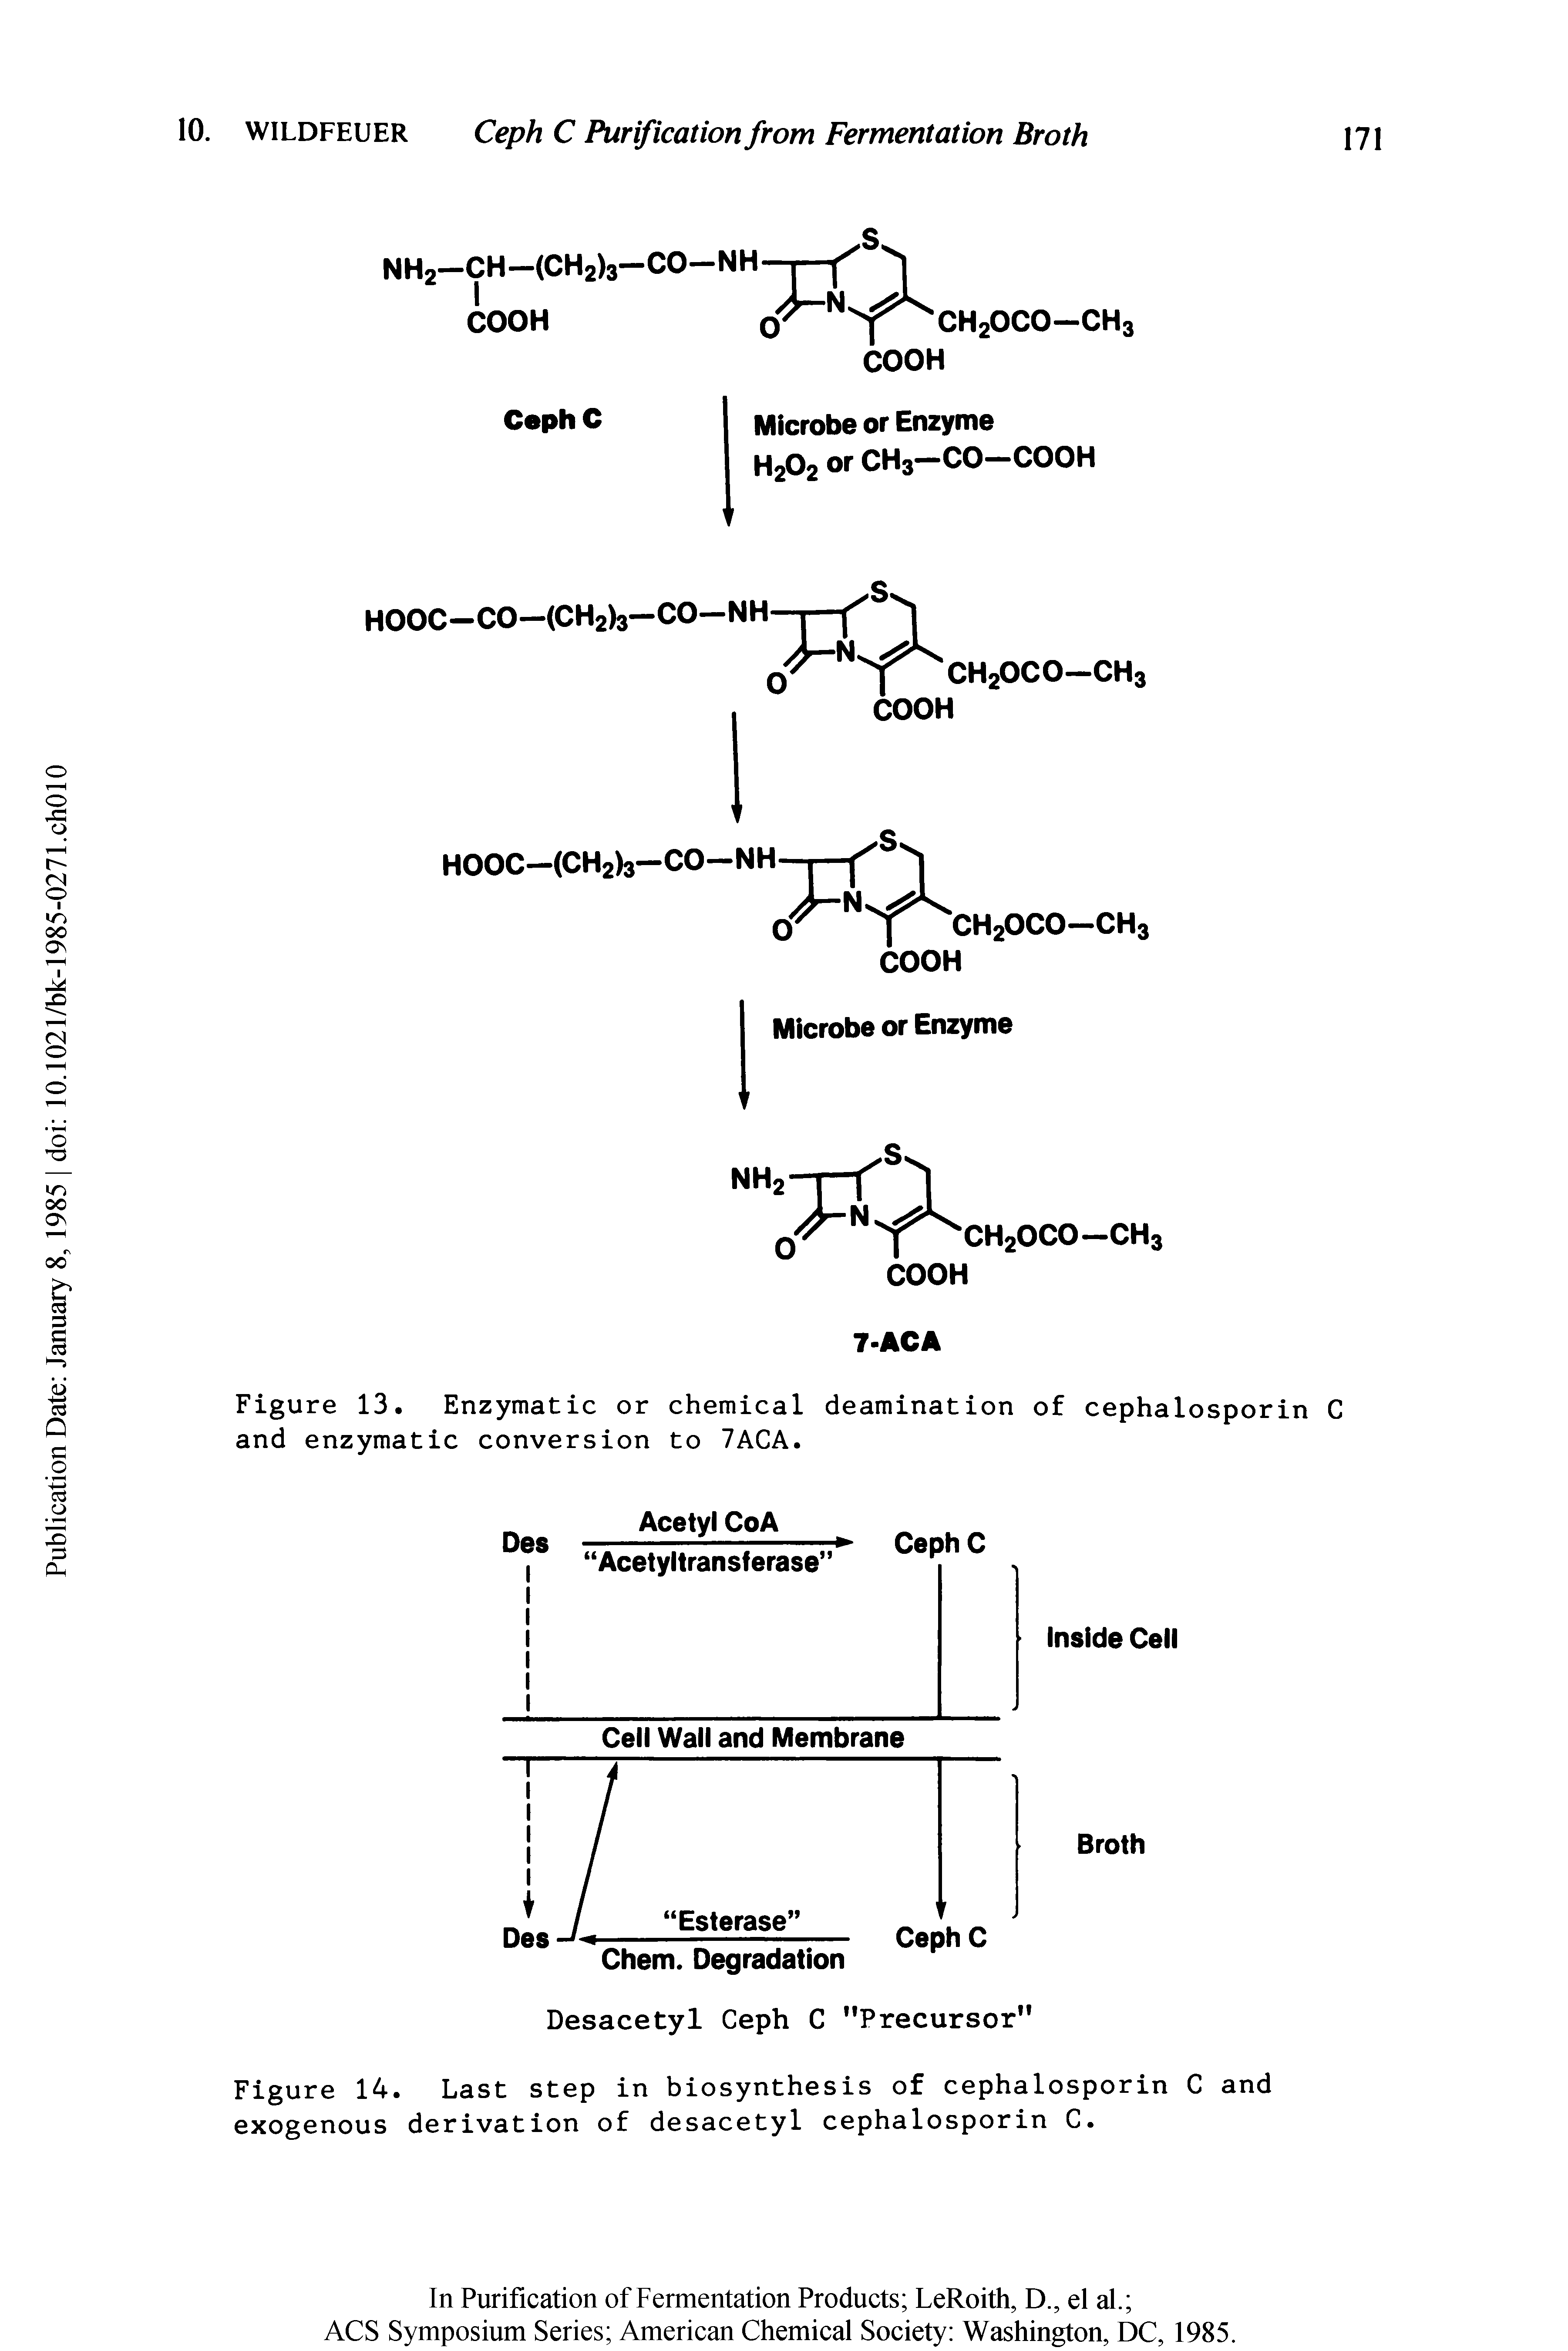 Figure 13. Enzymatic or chemical deamination of cephalosporin C and enzymatic conversion to 7ACA.